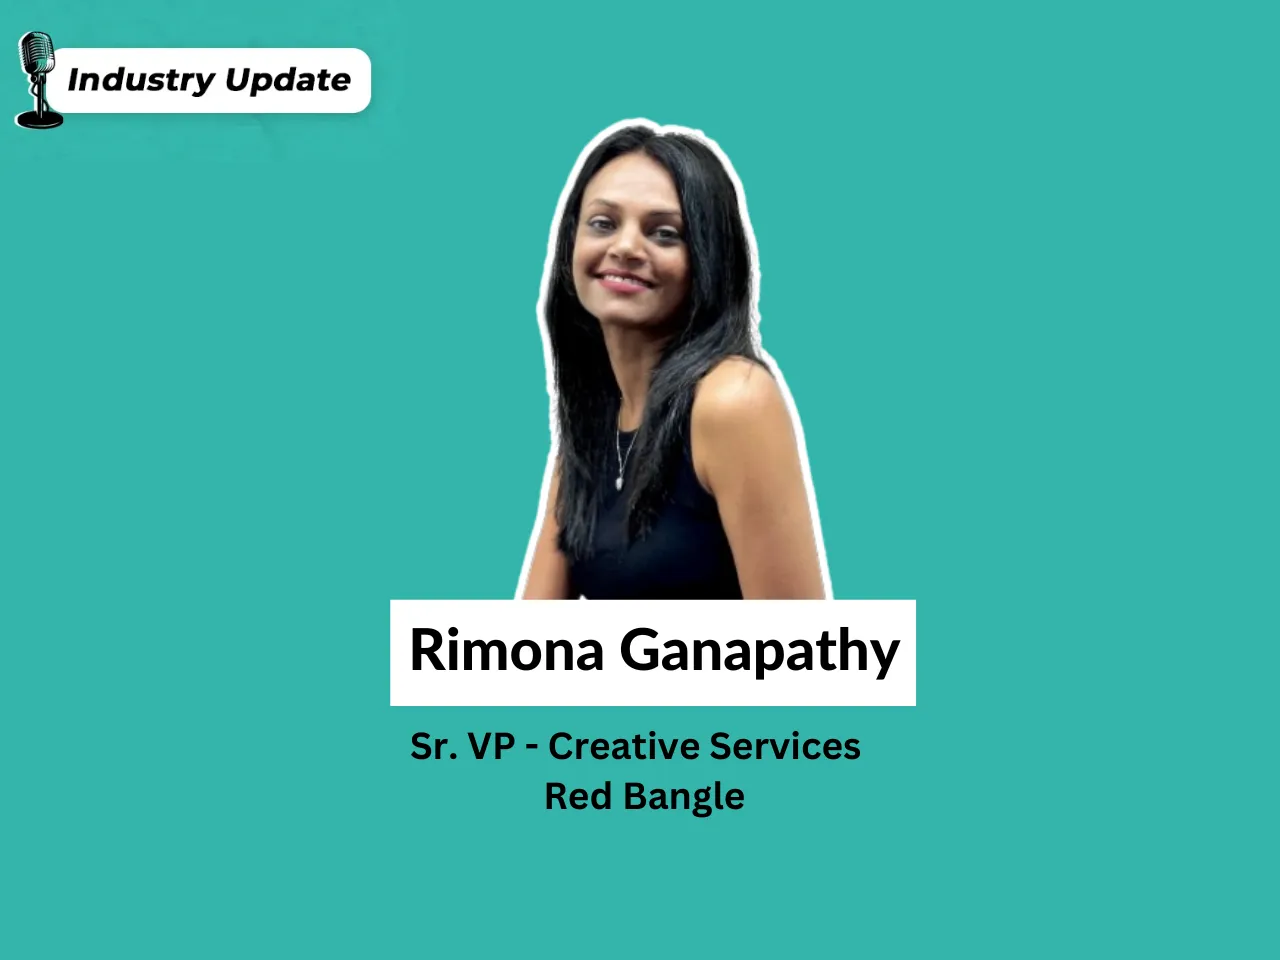 Rimona Ganapathy joins Red Bangle as Sr. VP - Creative Services